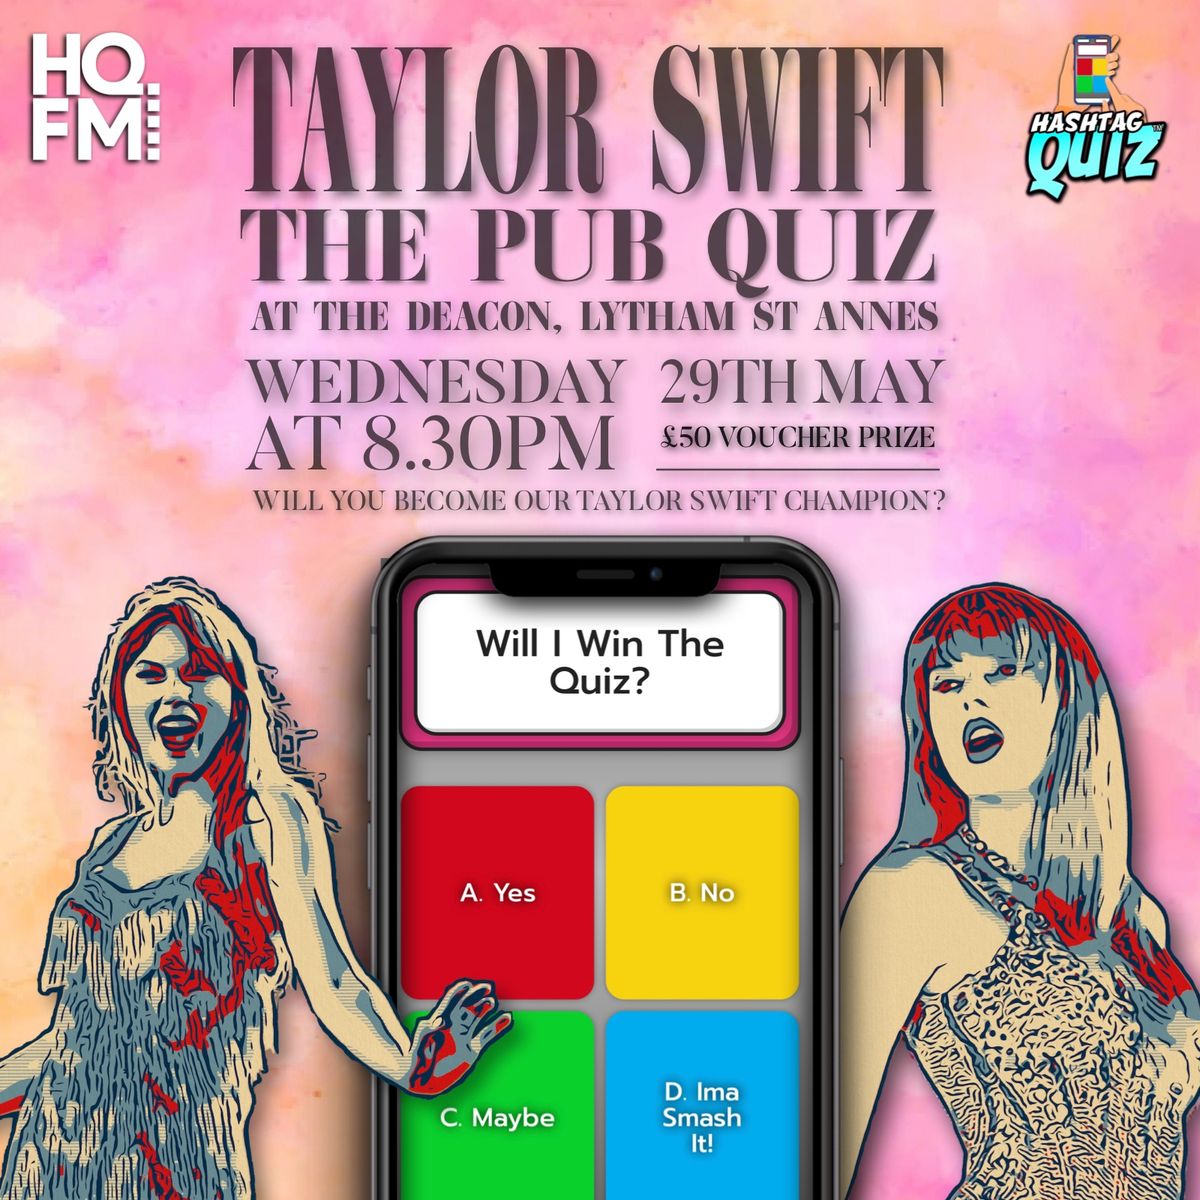 The Ultimate Taylor Swift Pub Quiz At The Deacon, Lytham St Annes